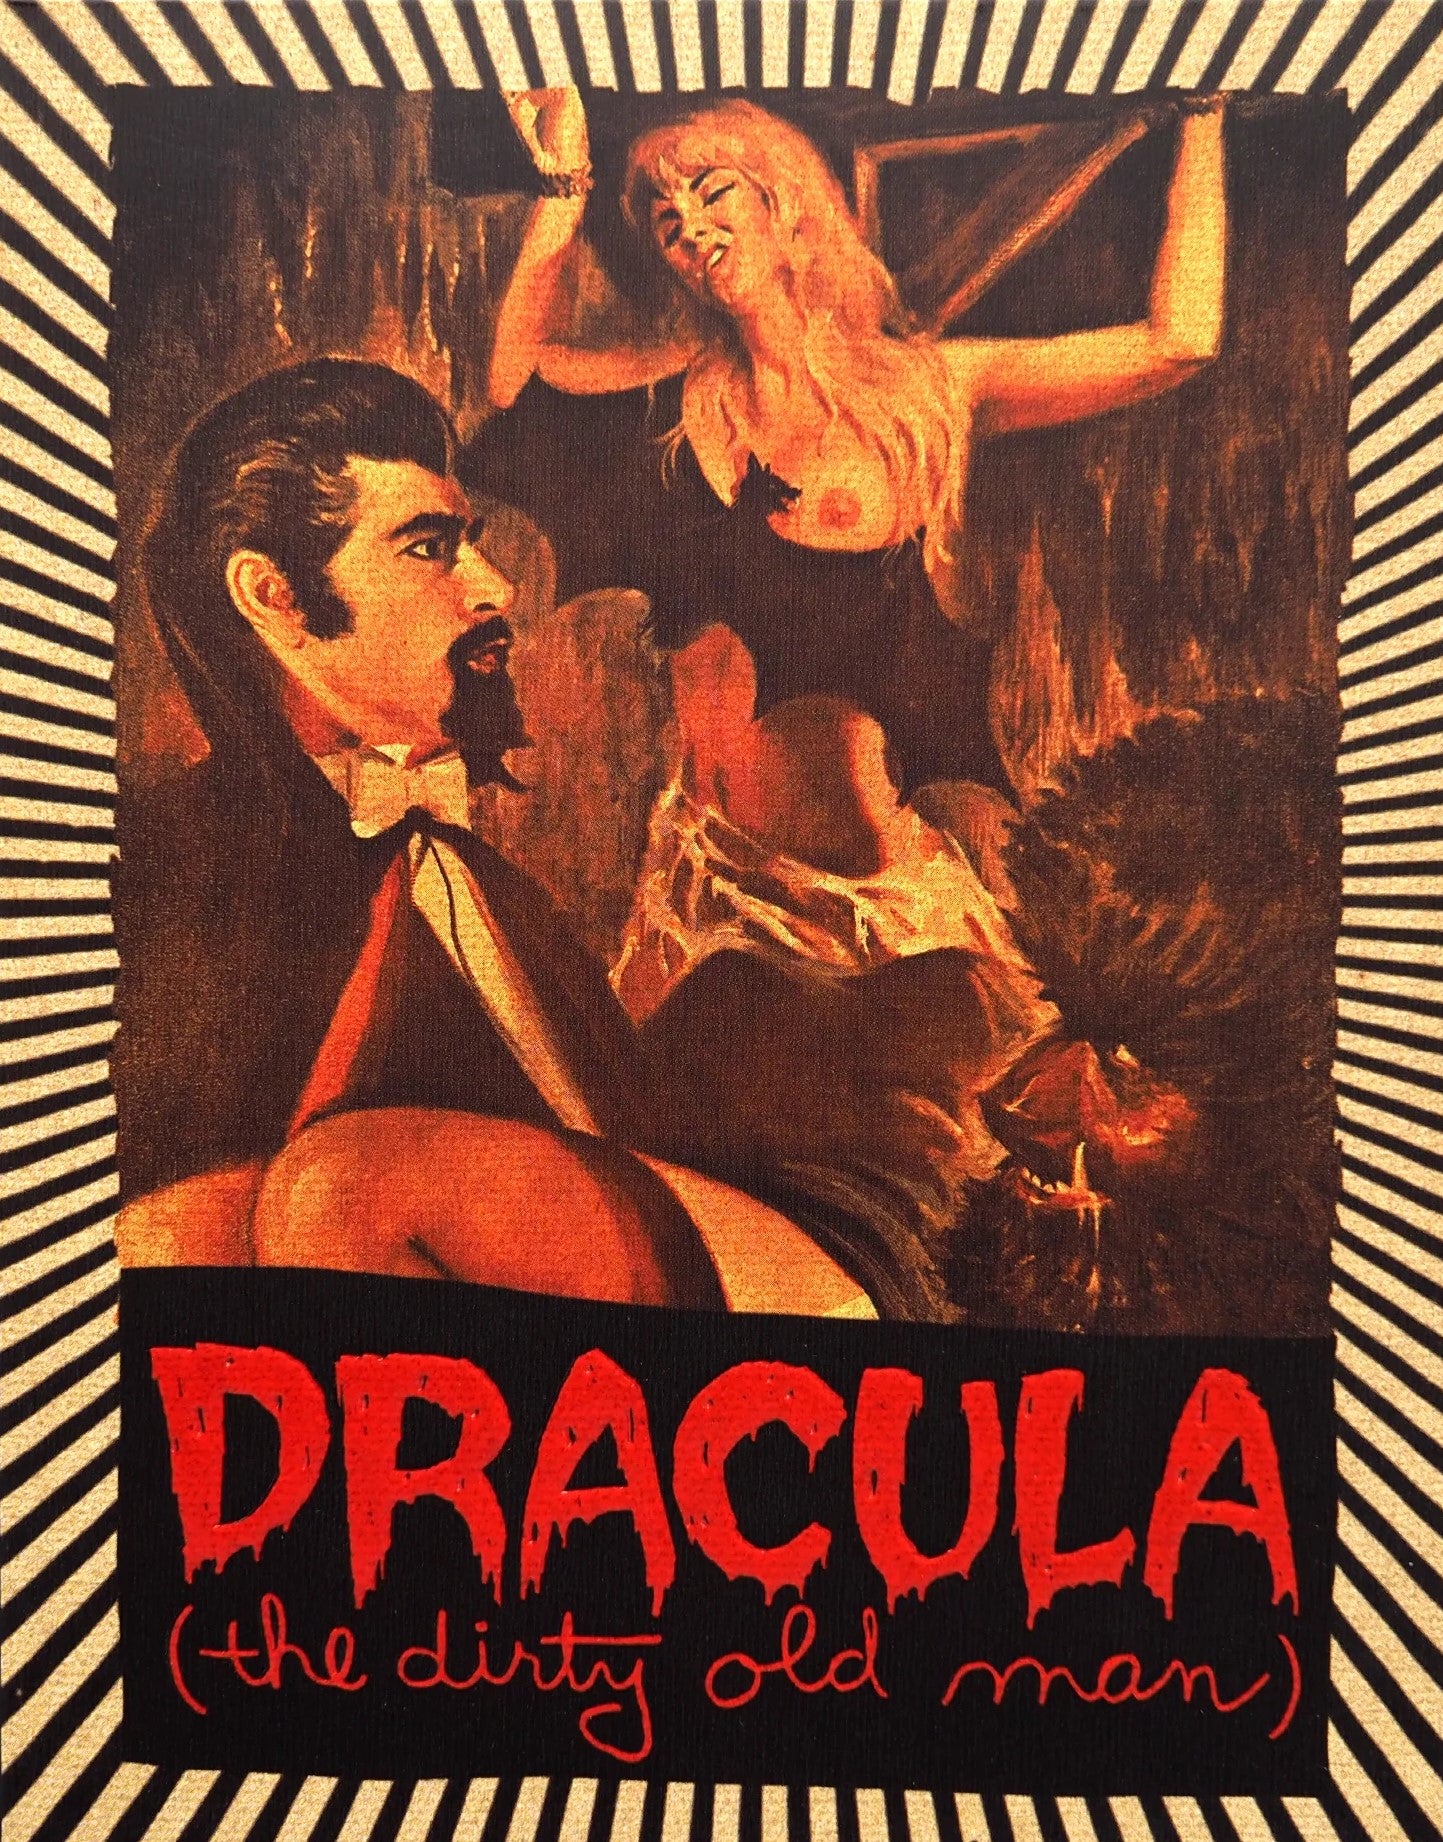 DRACULA (THE DIRTY OLD MAN) (LIMITED EDITION) BLU-RAY